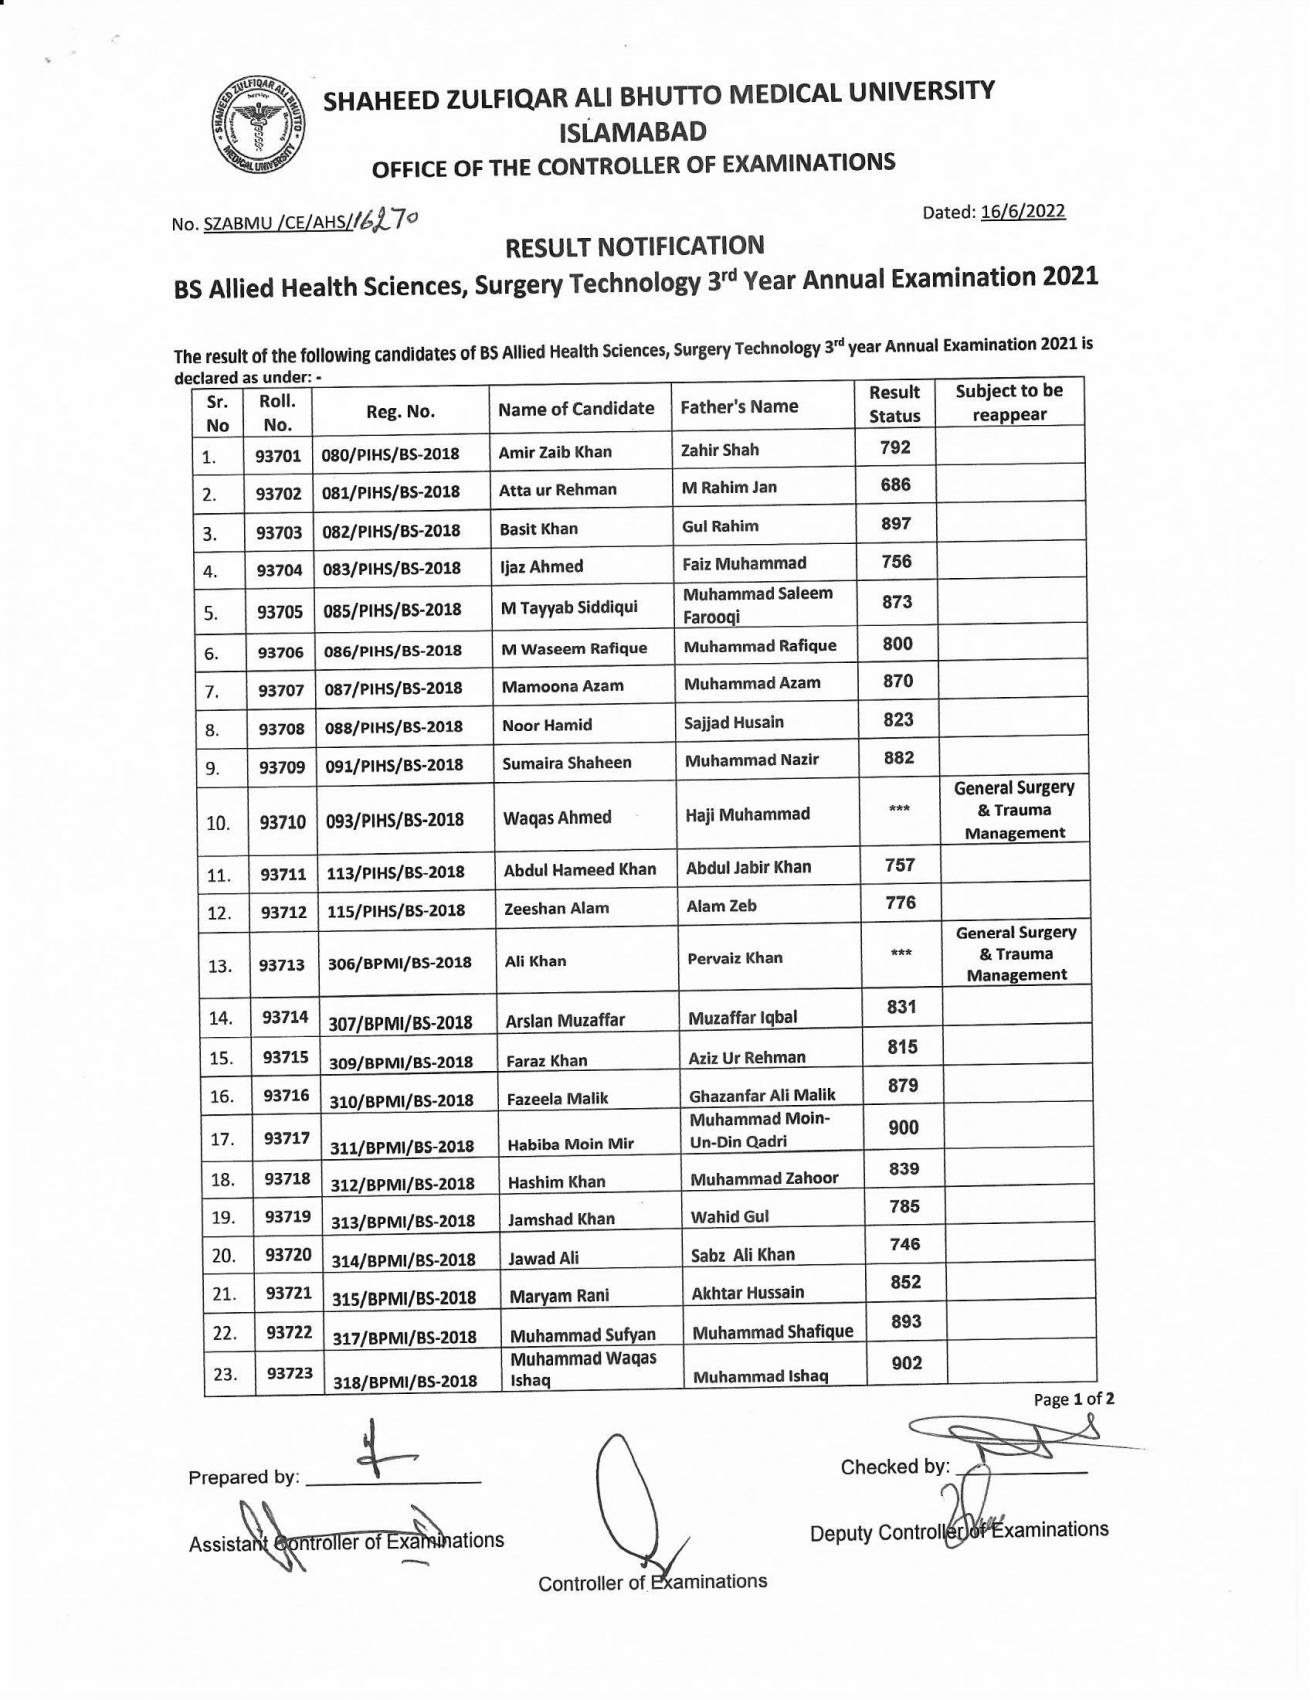 Result Notification - BS Allied Health Sciences 3rd Year Annual Examination 2021